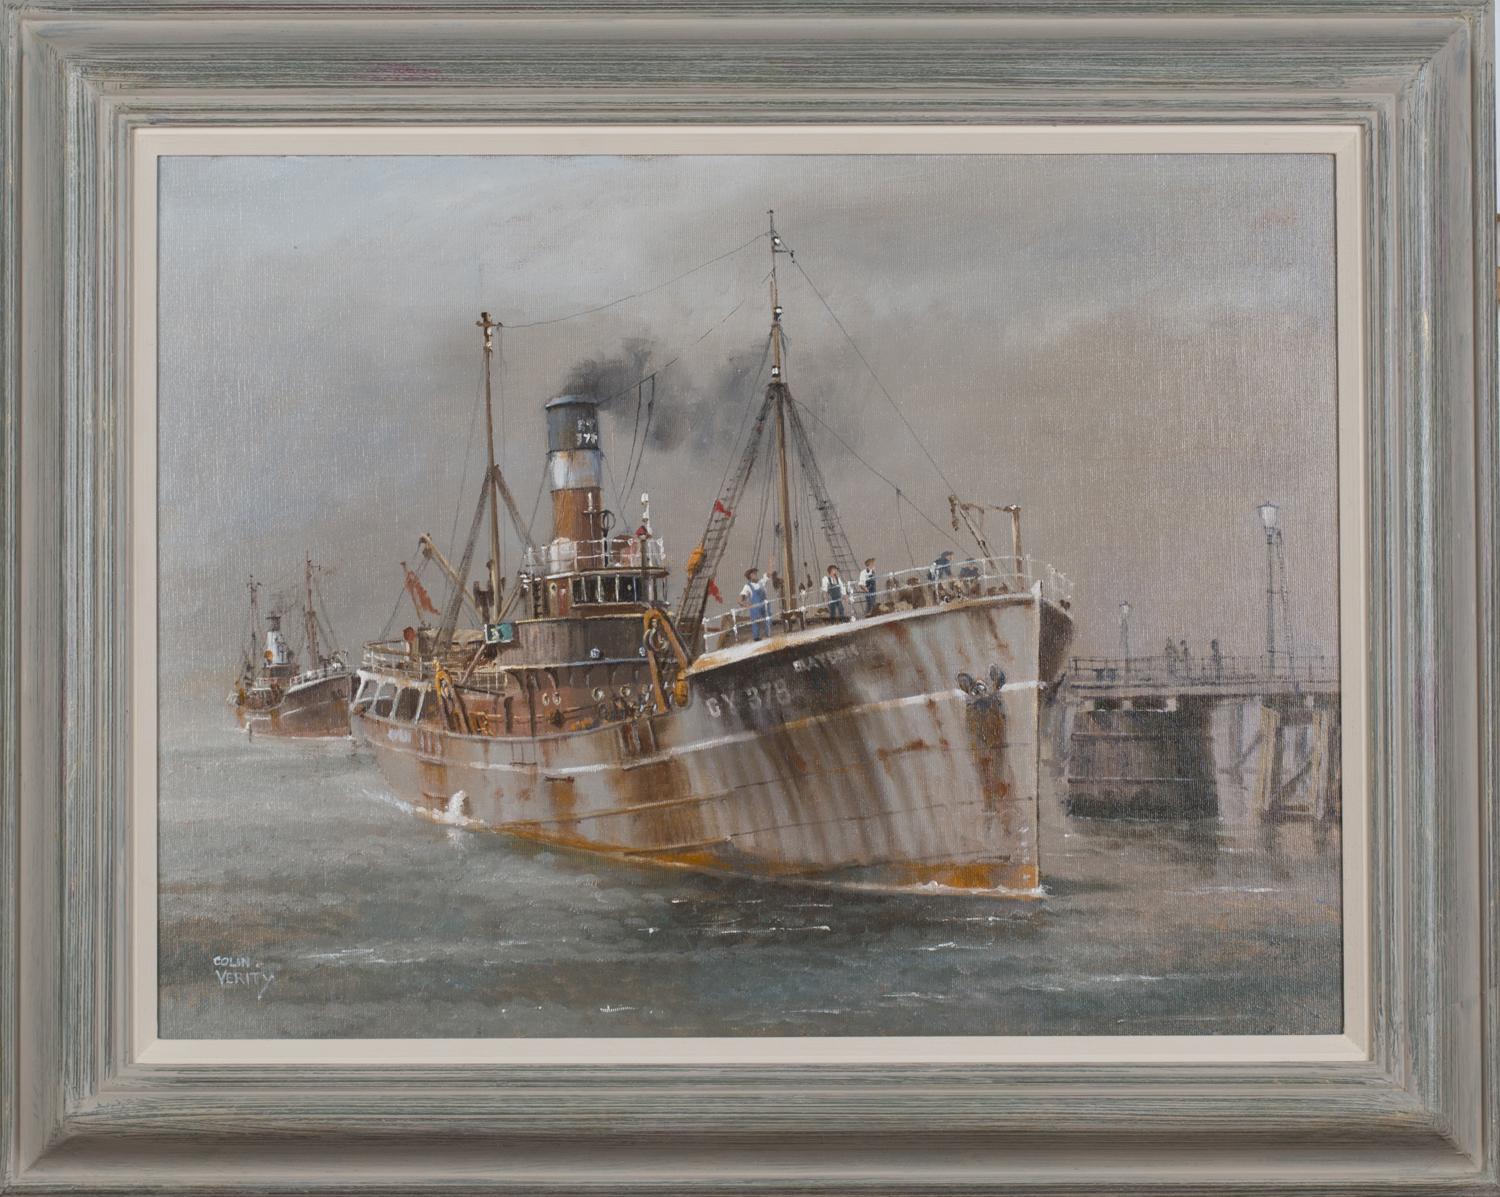 Colin Verity - Grimsby Fishing Vessels in a Harbour, 20th century oil on canvas-board, signed, 44.